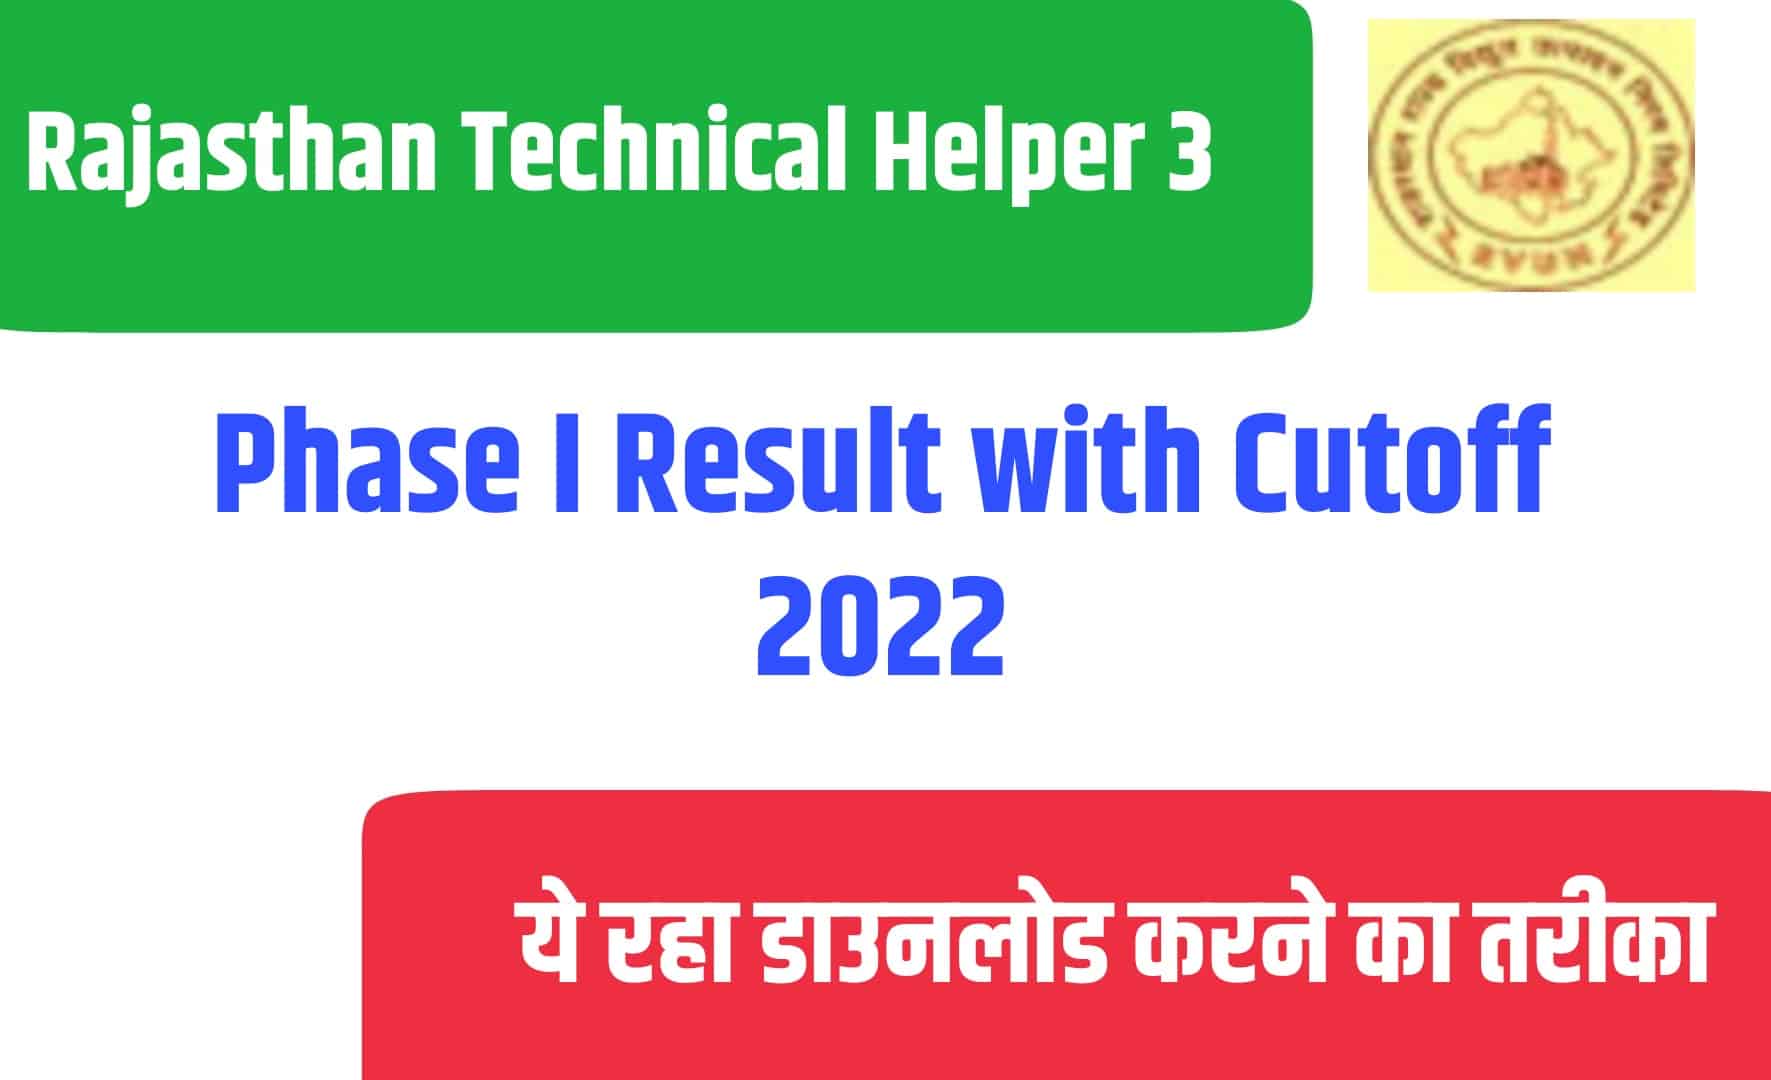 Rajasthan Technical Helper 3 Phase I Result with Cutoff 2022